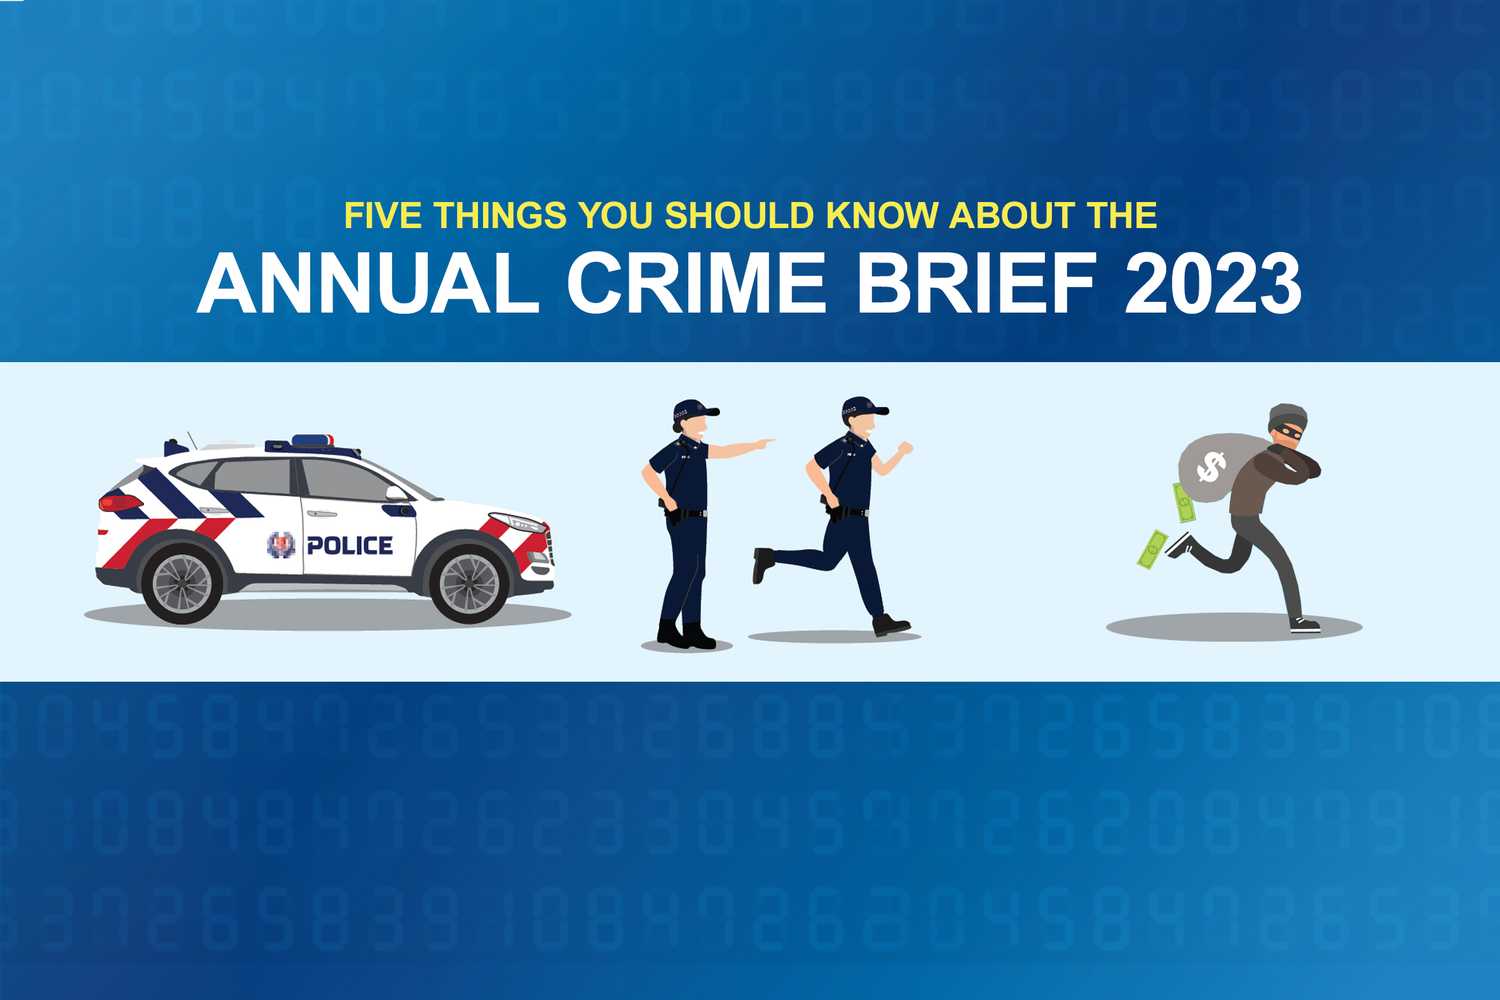 Police Life 022024 Five Things You Should Know About the Annual Crime Brief 2023 01